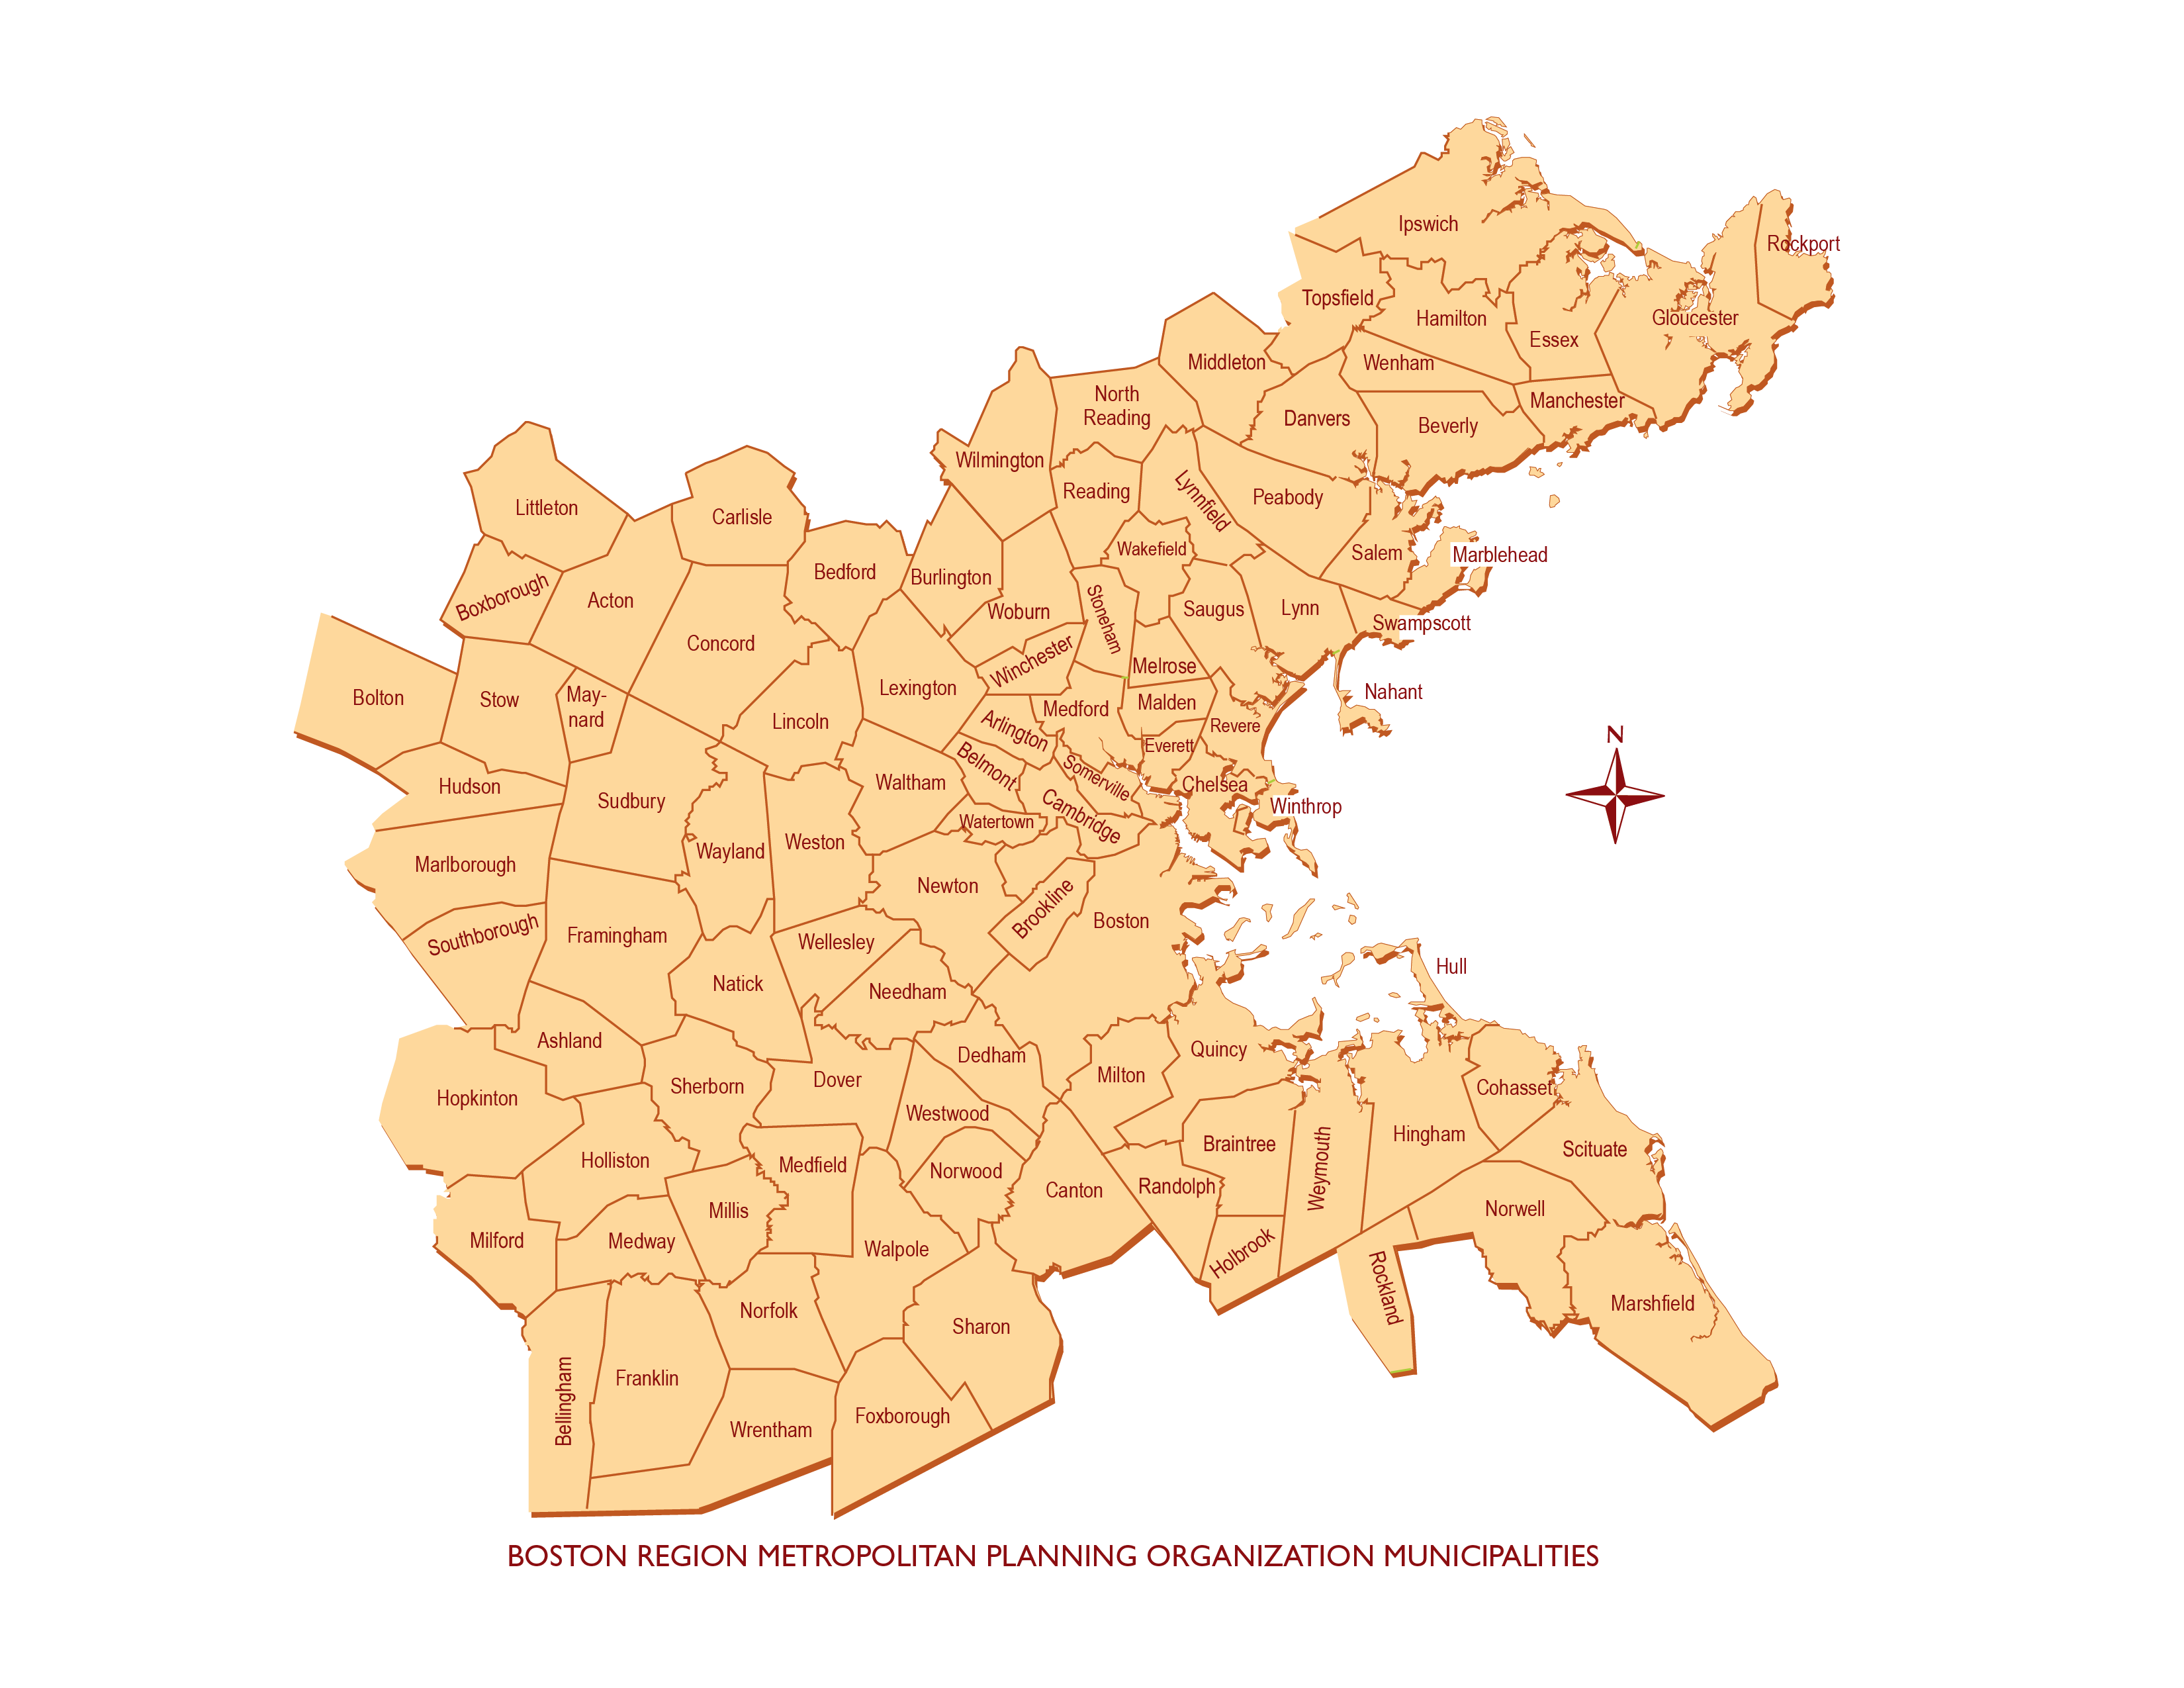 This image is a map of the 97 municipalities that comprise the Boston Region MPO area.